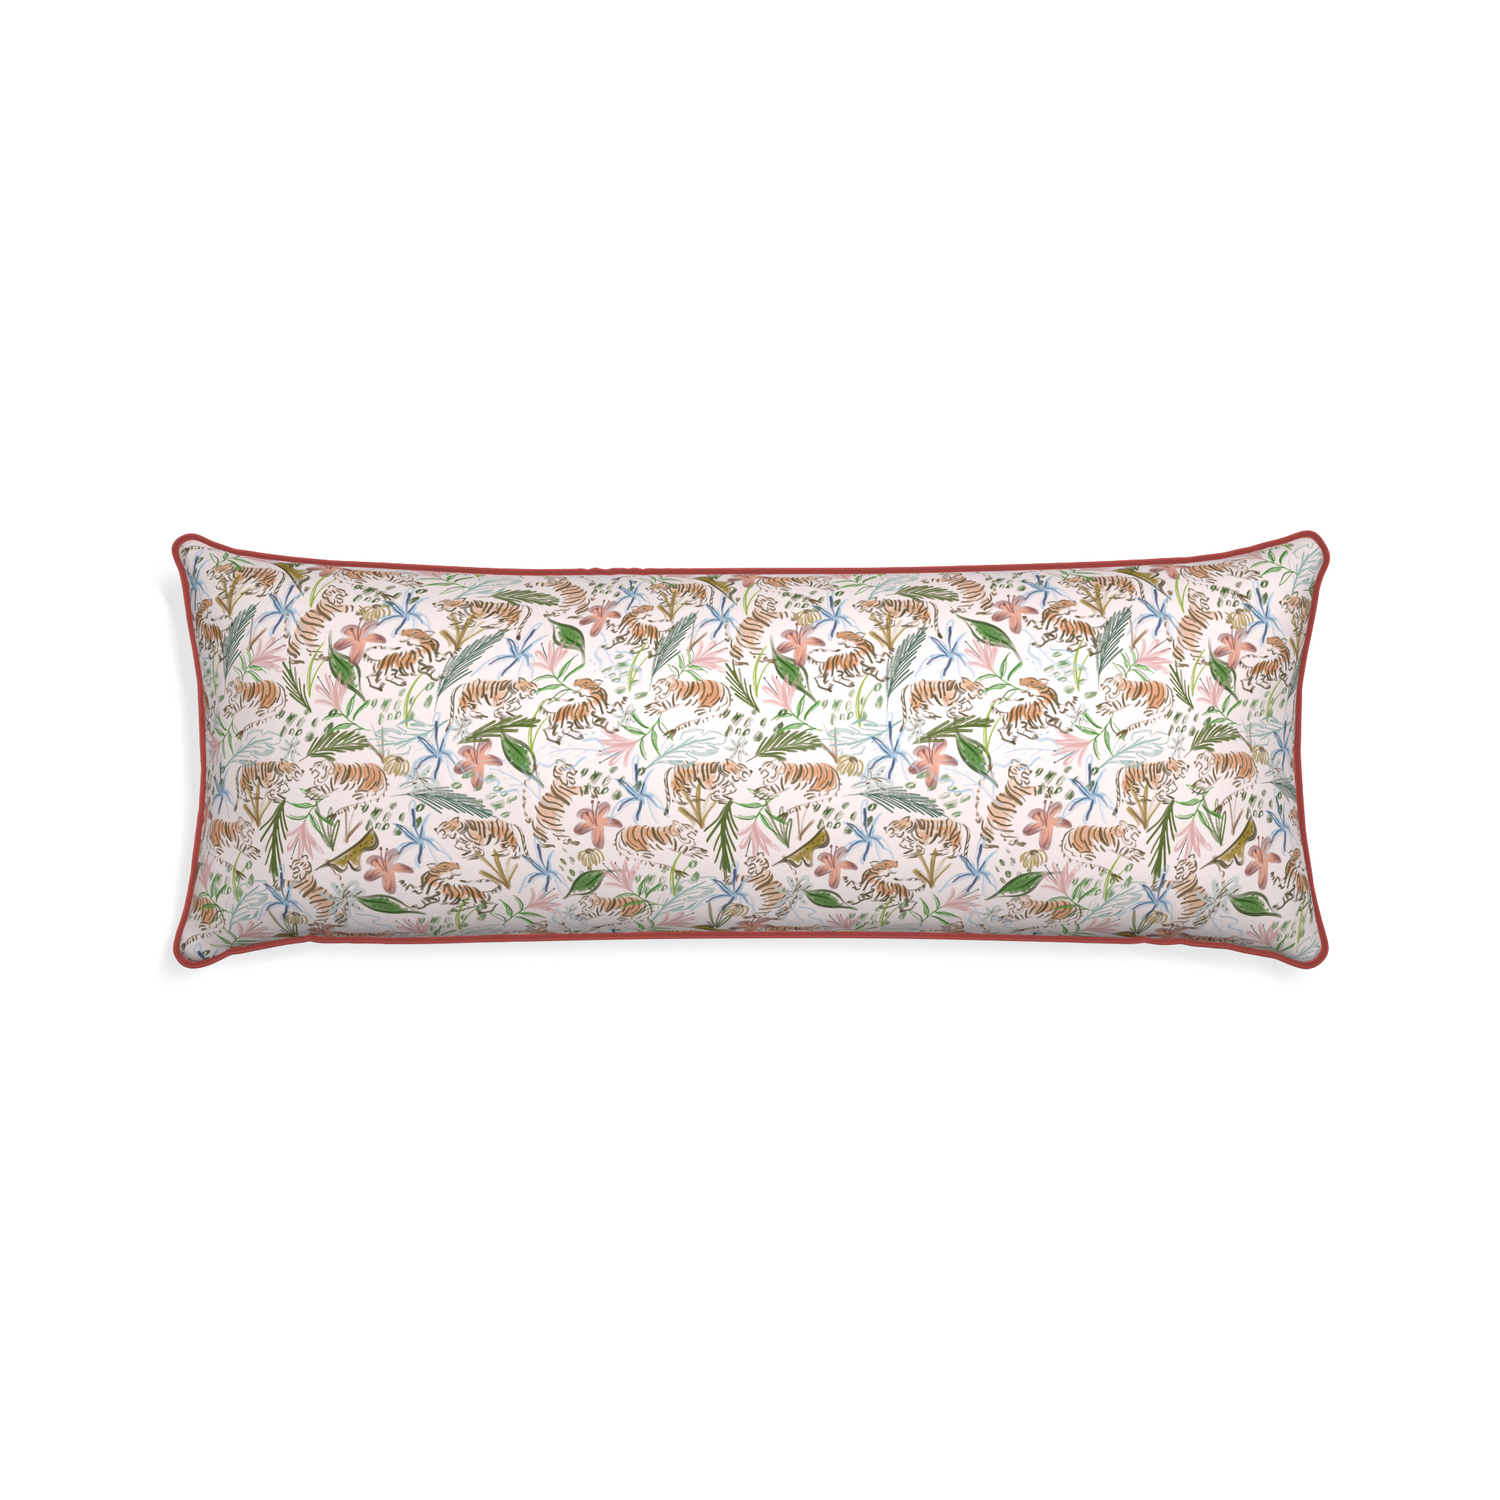 Xl-lumbar frida pink custom pillow with c piping on white background